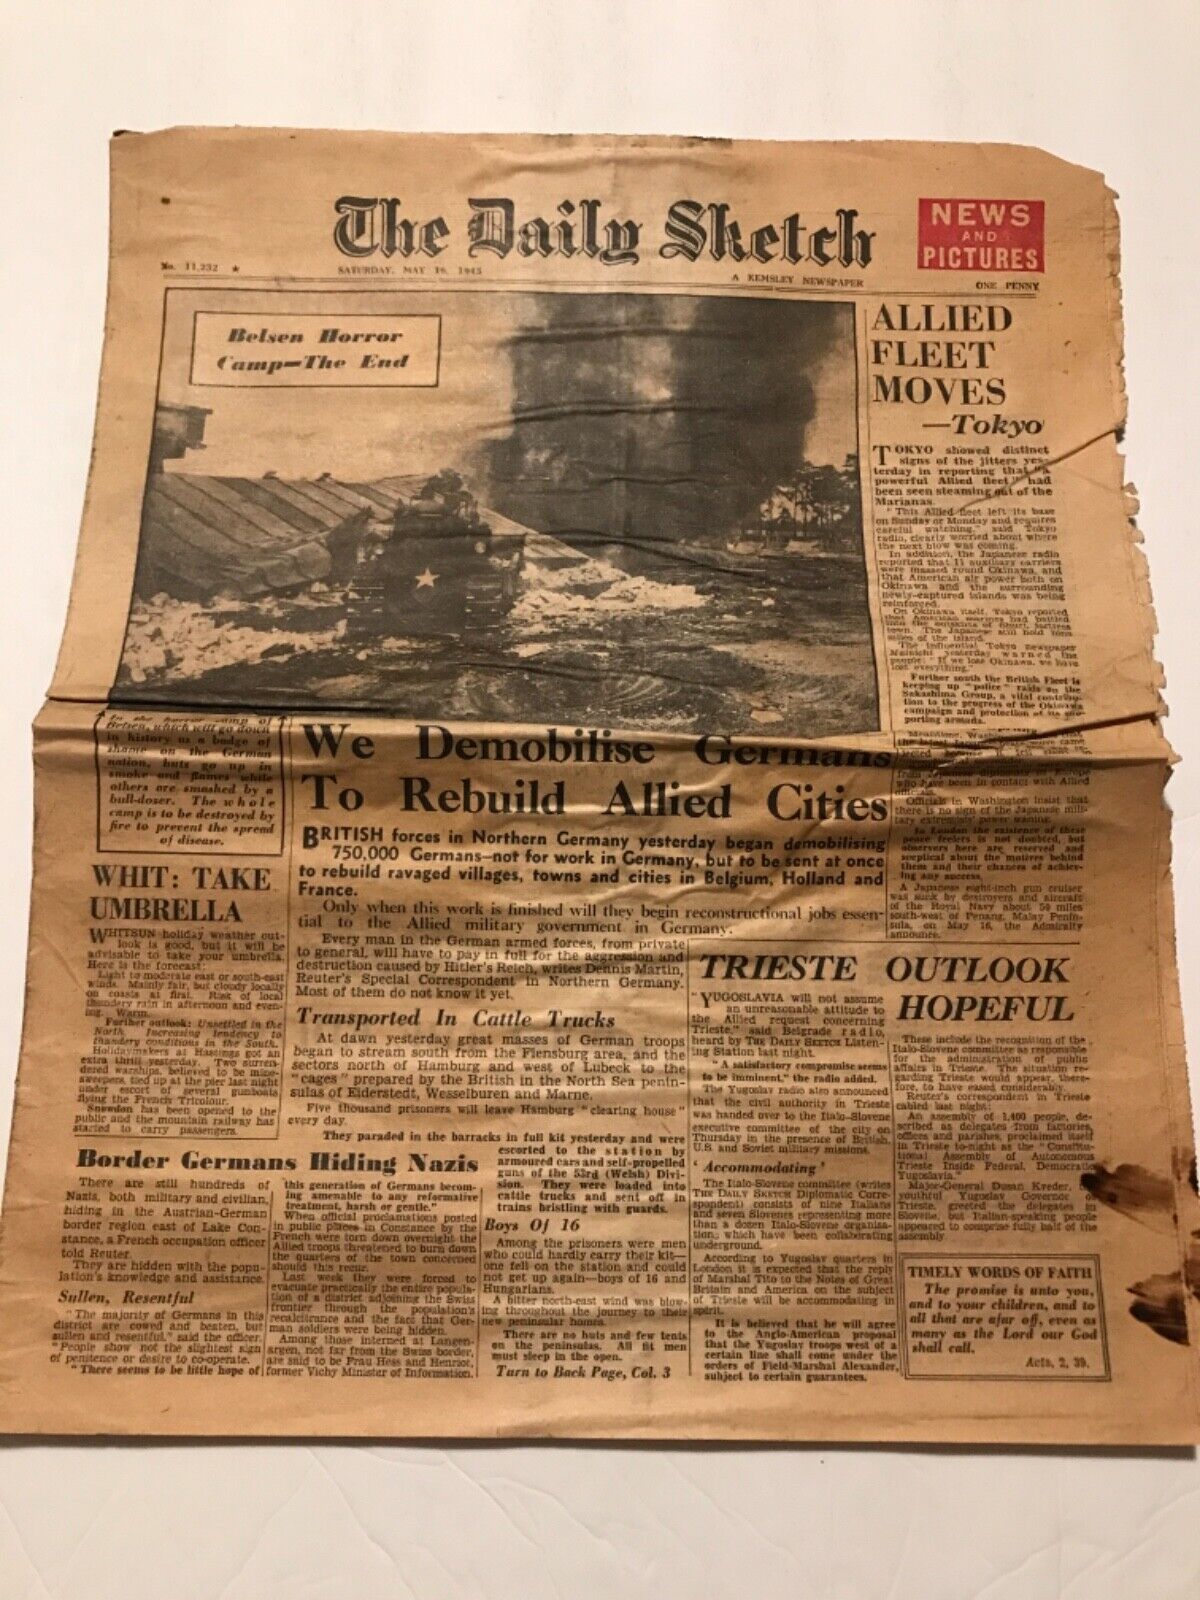 The Daily Sketch  May 19, 1945 WW II, England